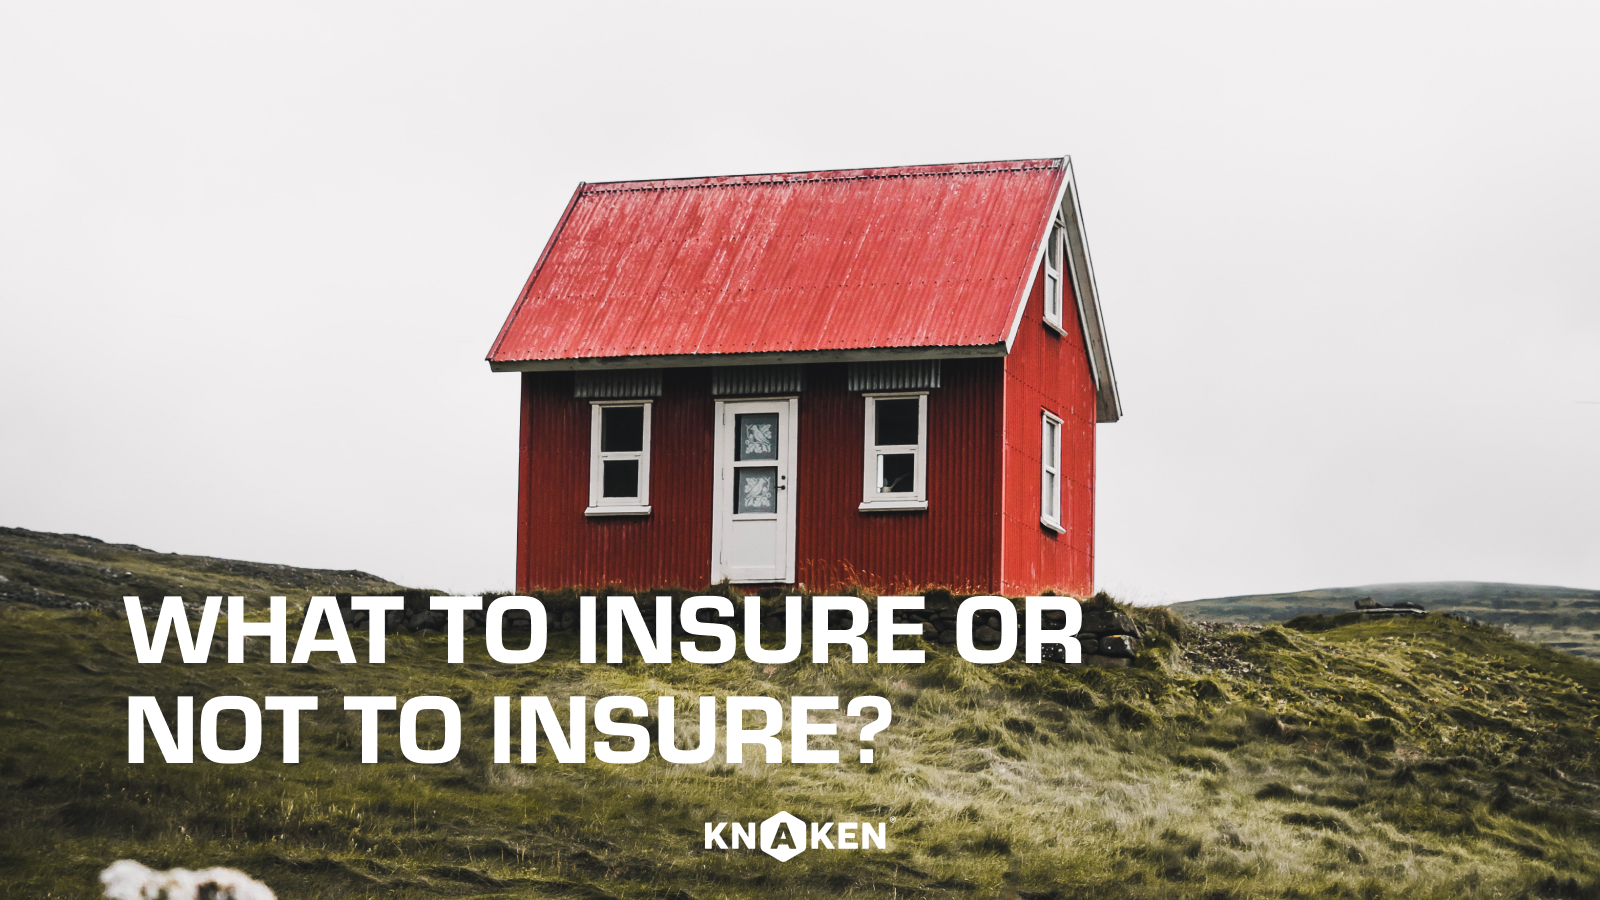 To insure or not to insure: what is the best choice for your valuables?